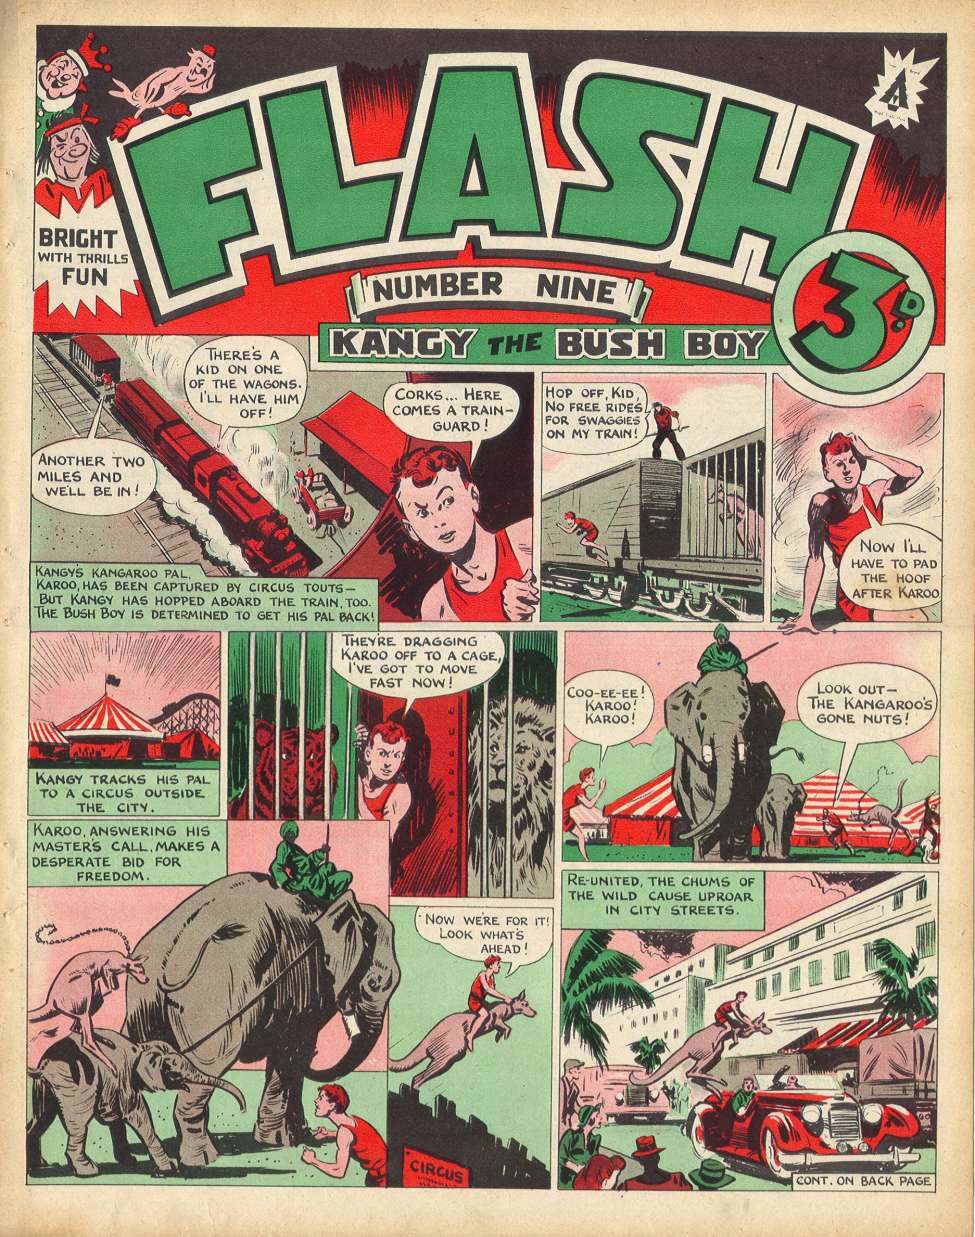 Book Cover For Flash 9